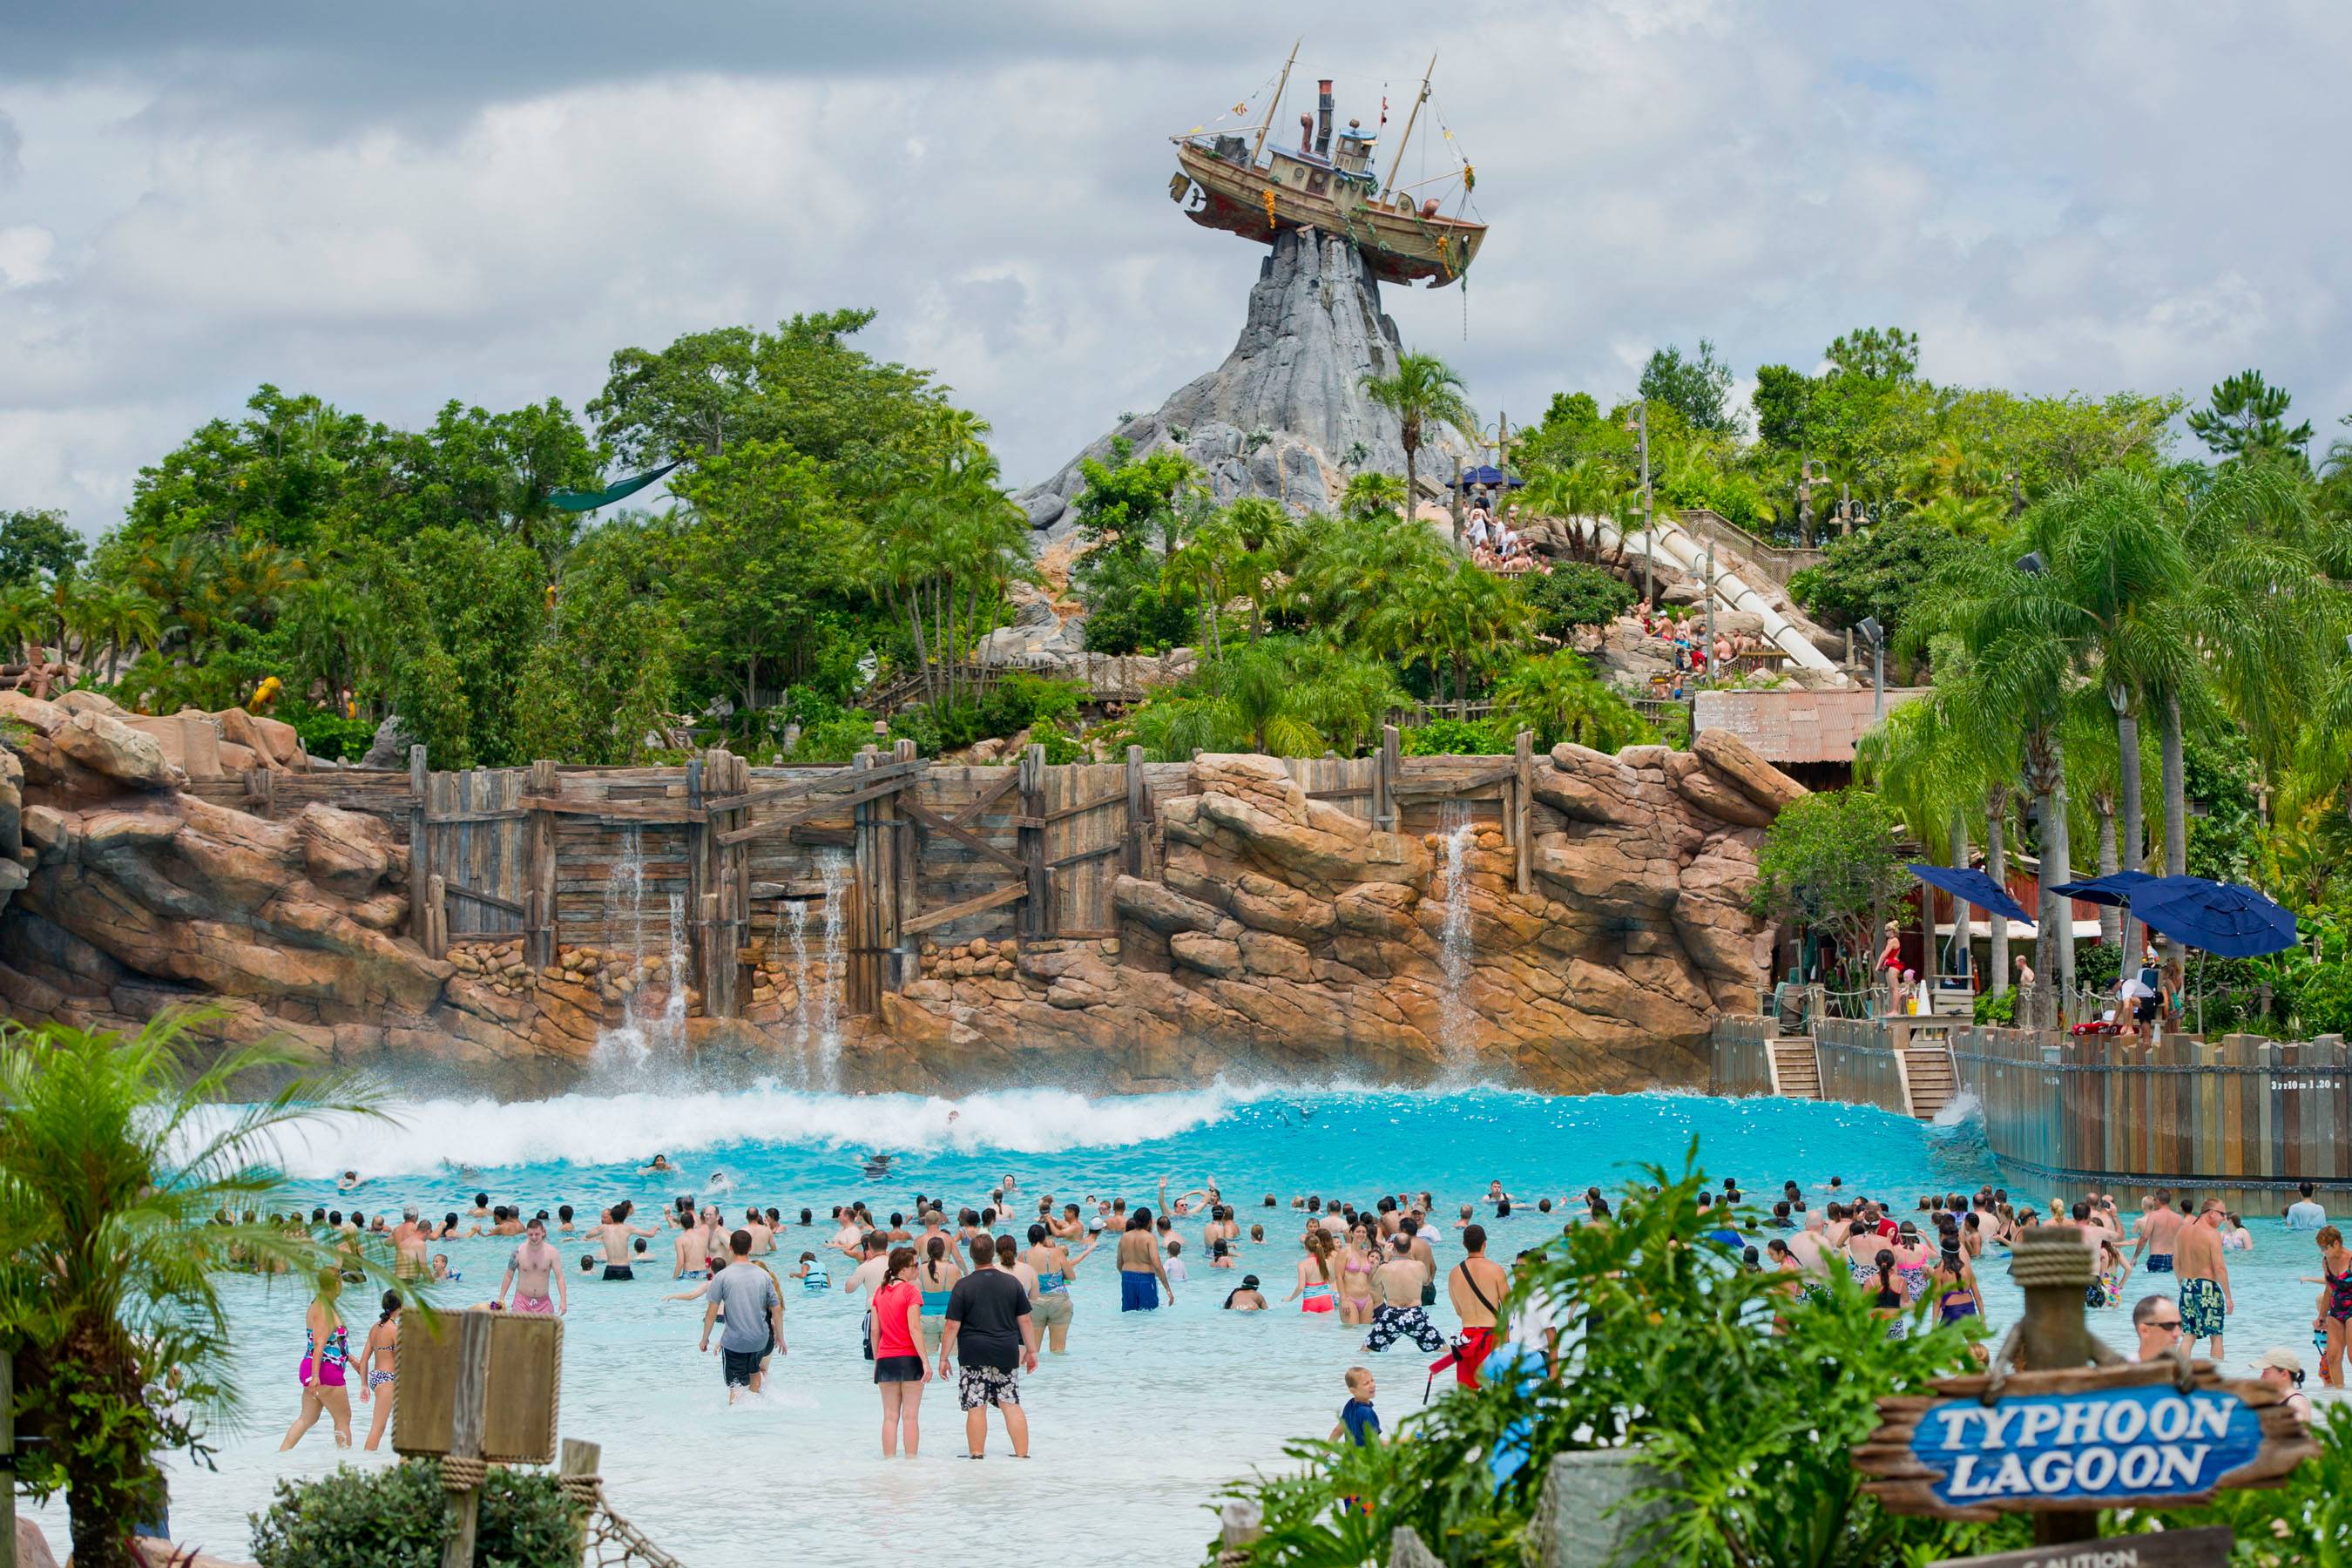 Disney's Typhoon Lagoon water park reopening date confirmed for early January